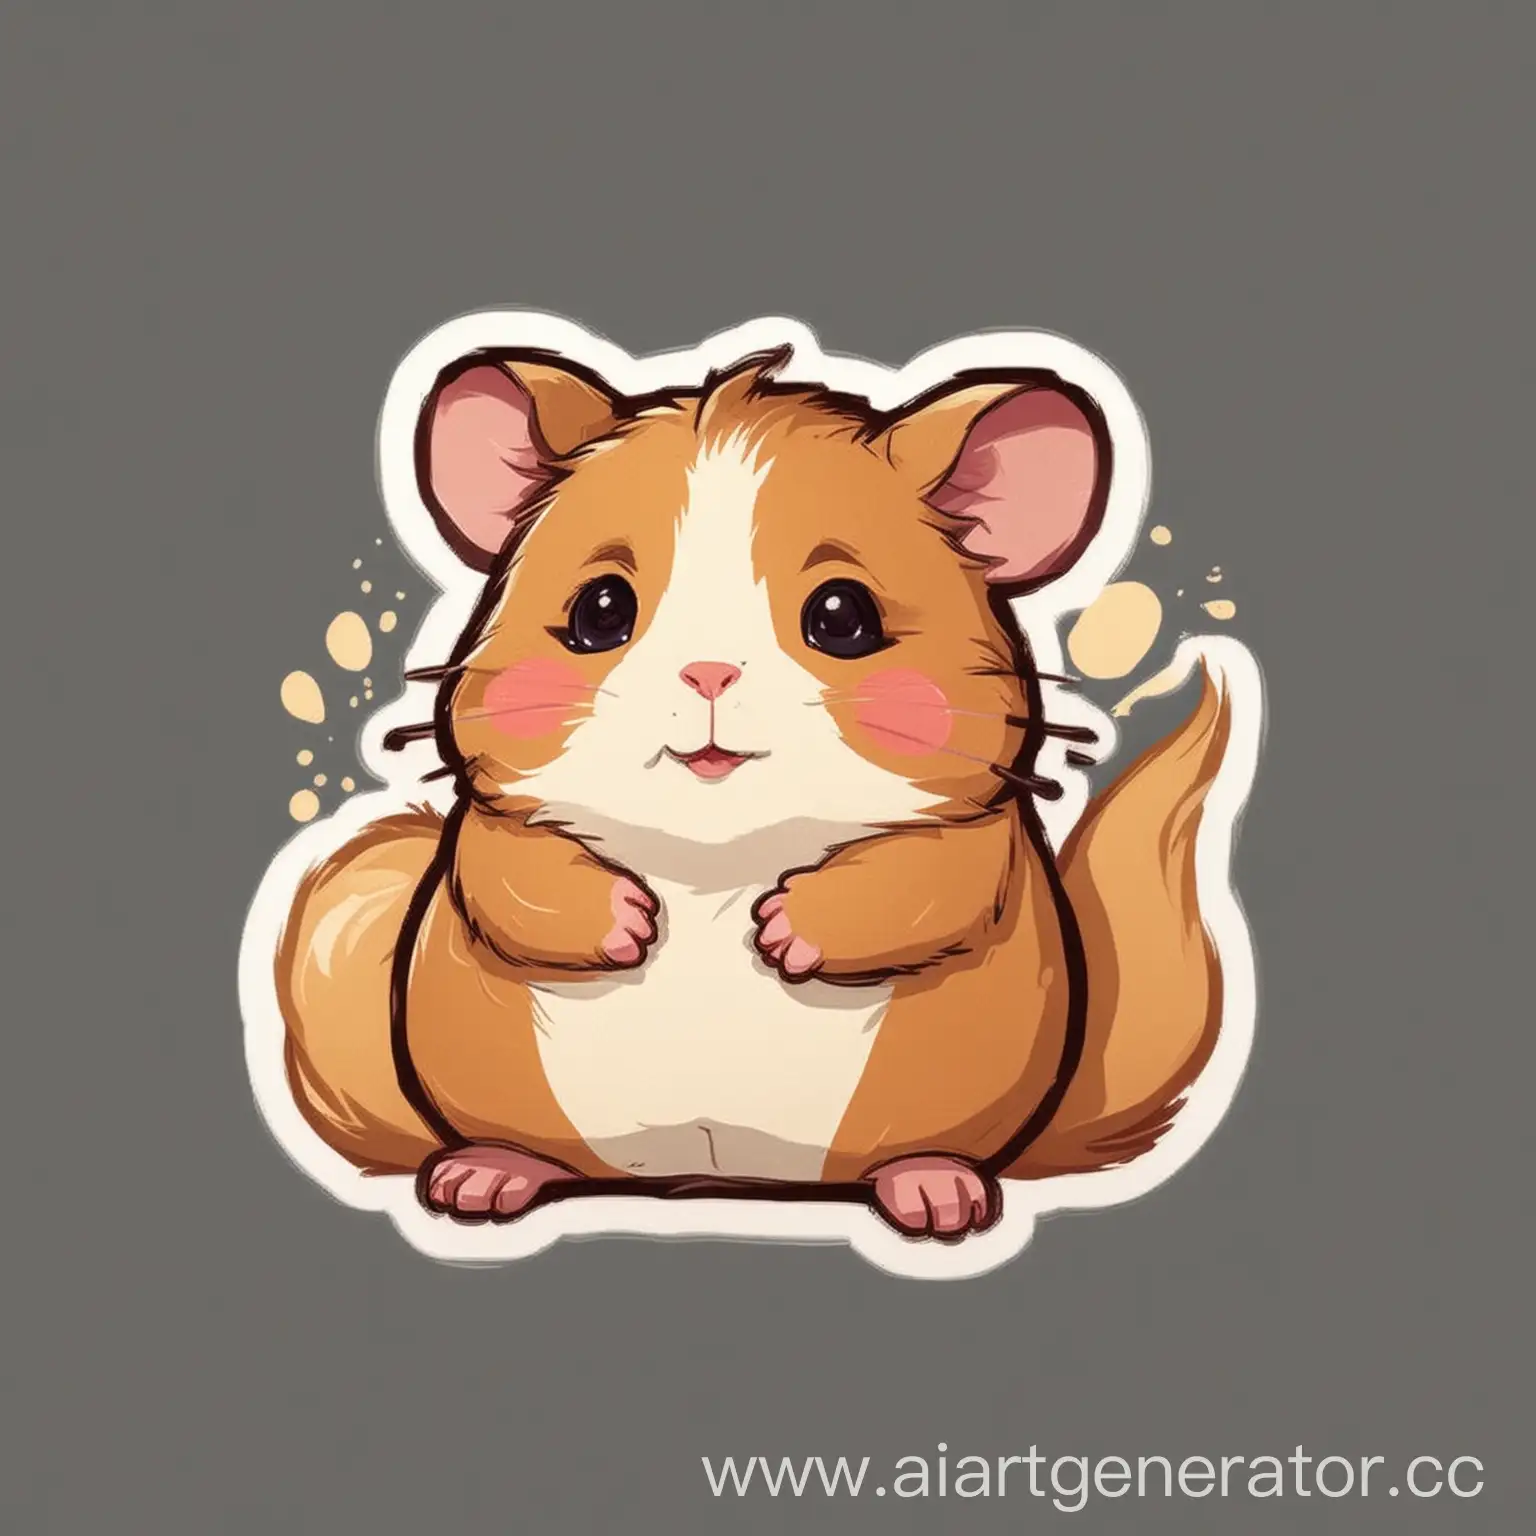 draw a 2d sticker with hamsters on a transparent background